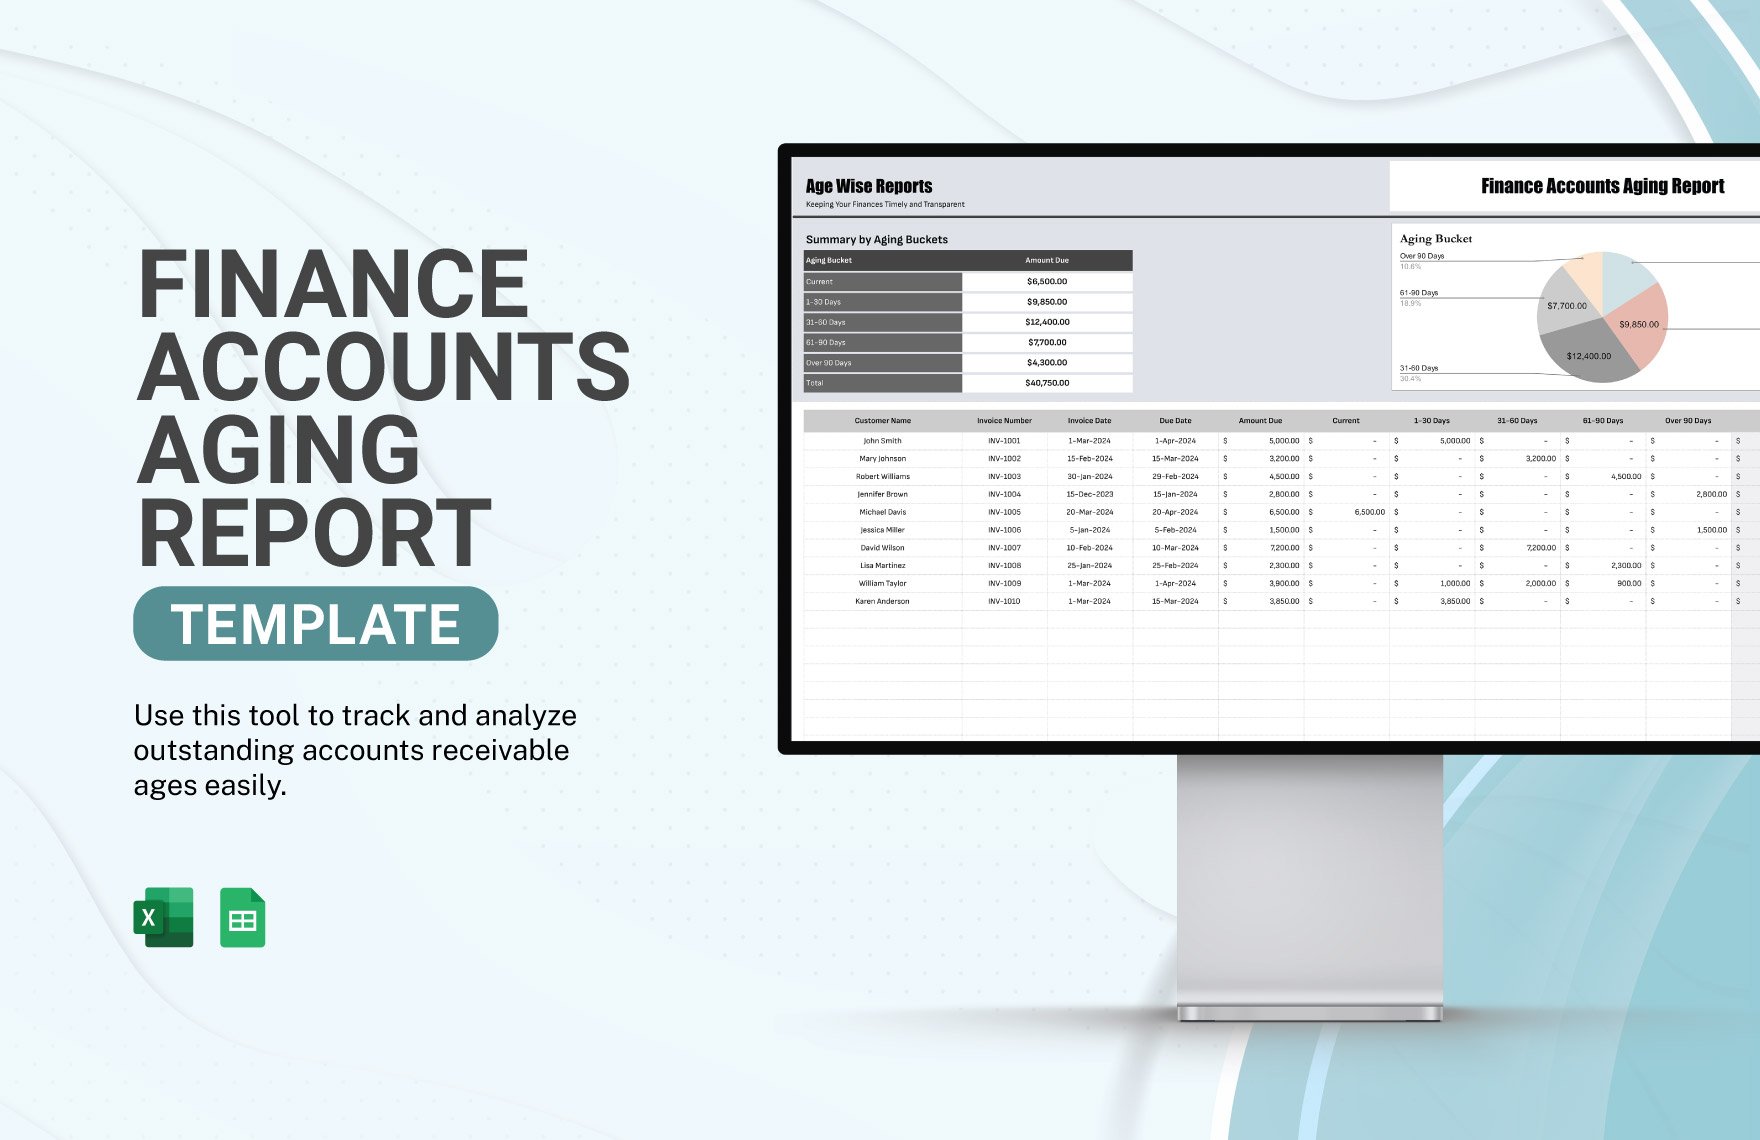 Finance Accounts Aging Report Template